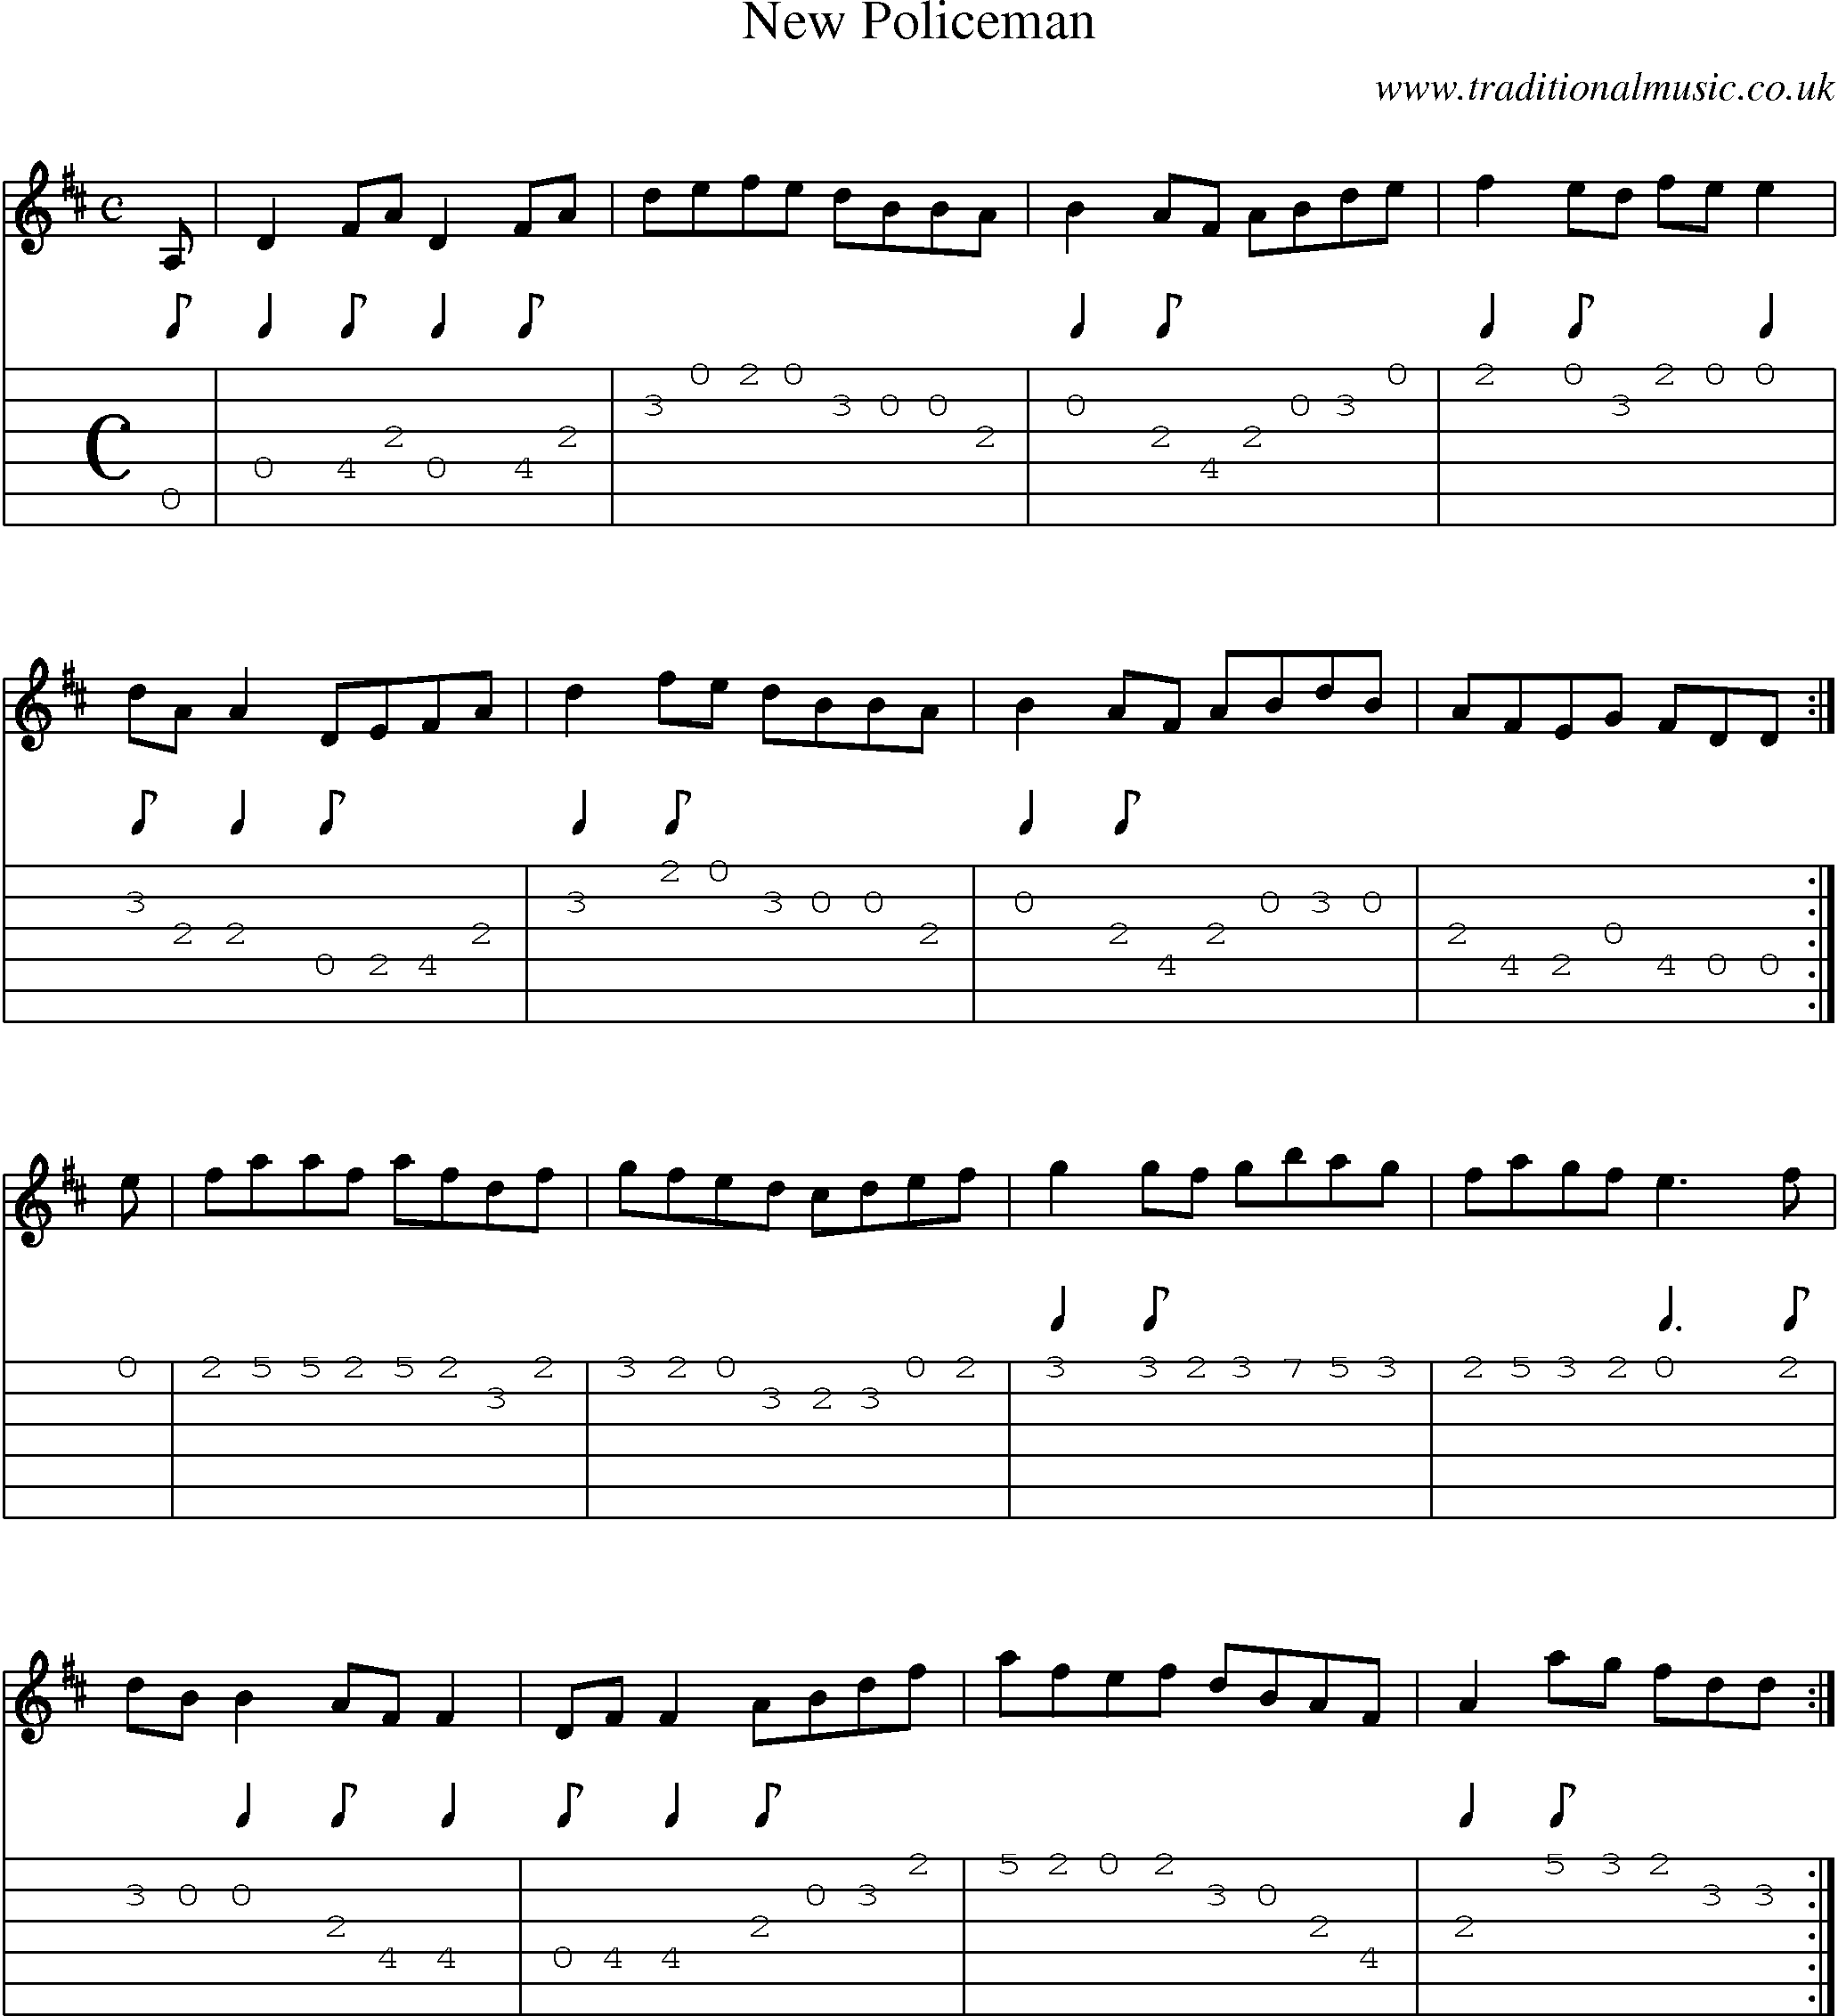 Music Score and Guitar Tabs for New Policeman